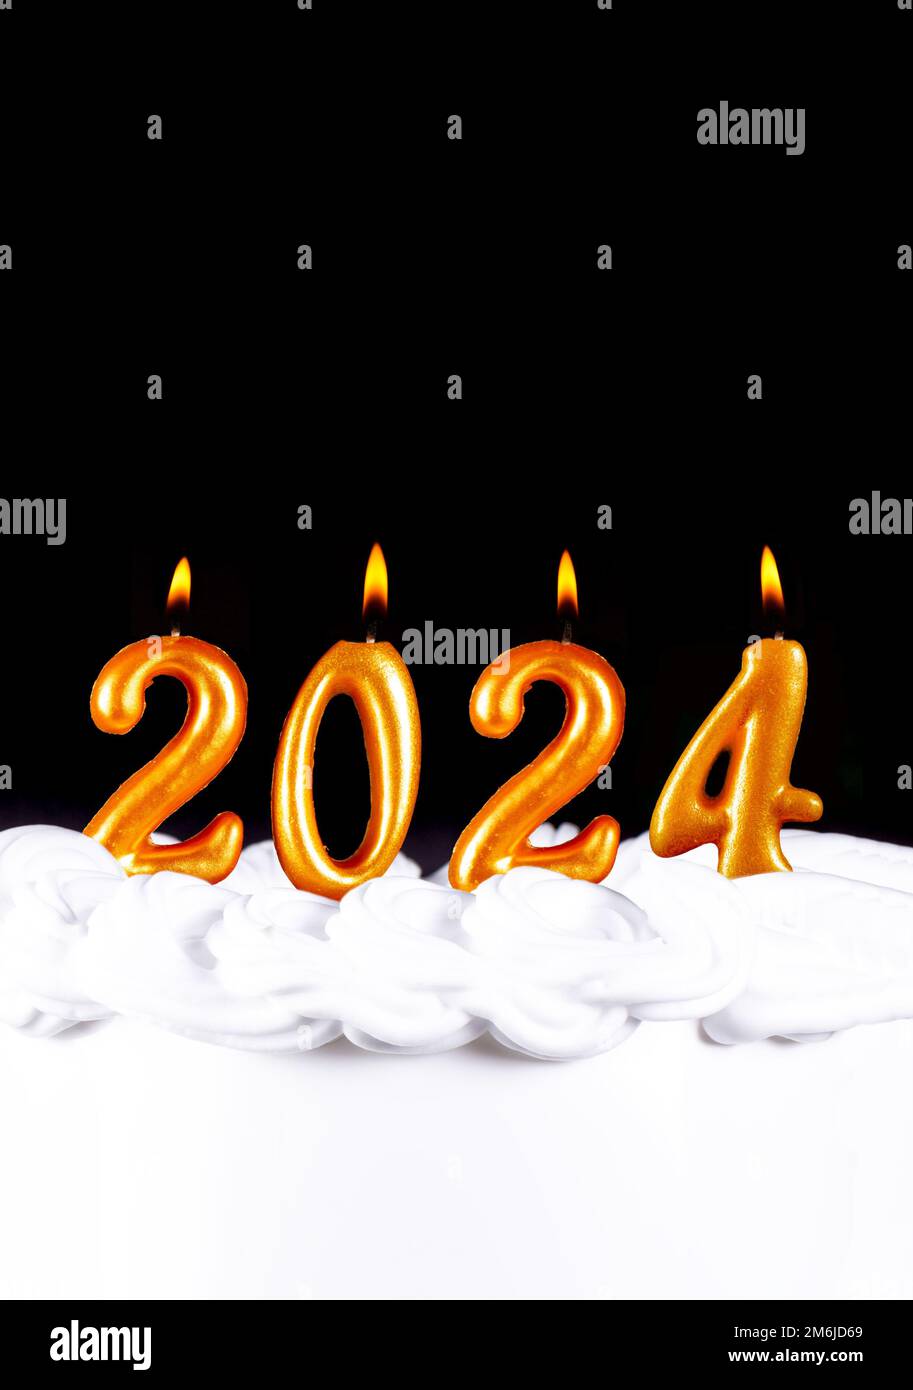 Golden candles write numbers flame Happy new year 2024 Stock Photo